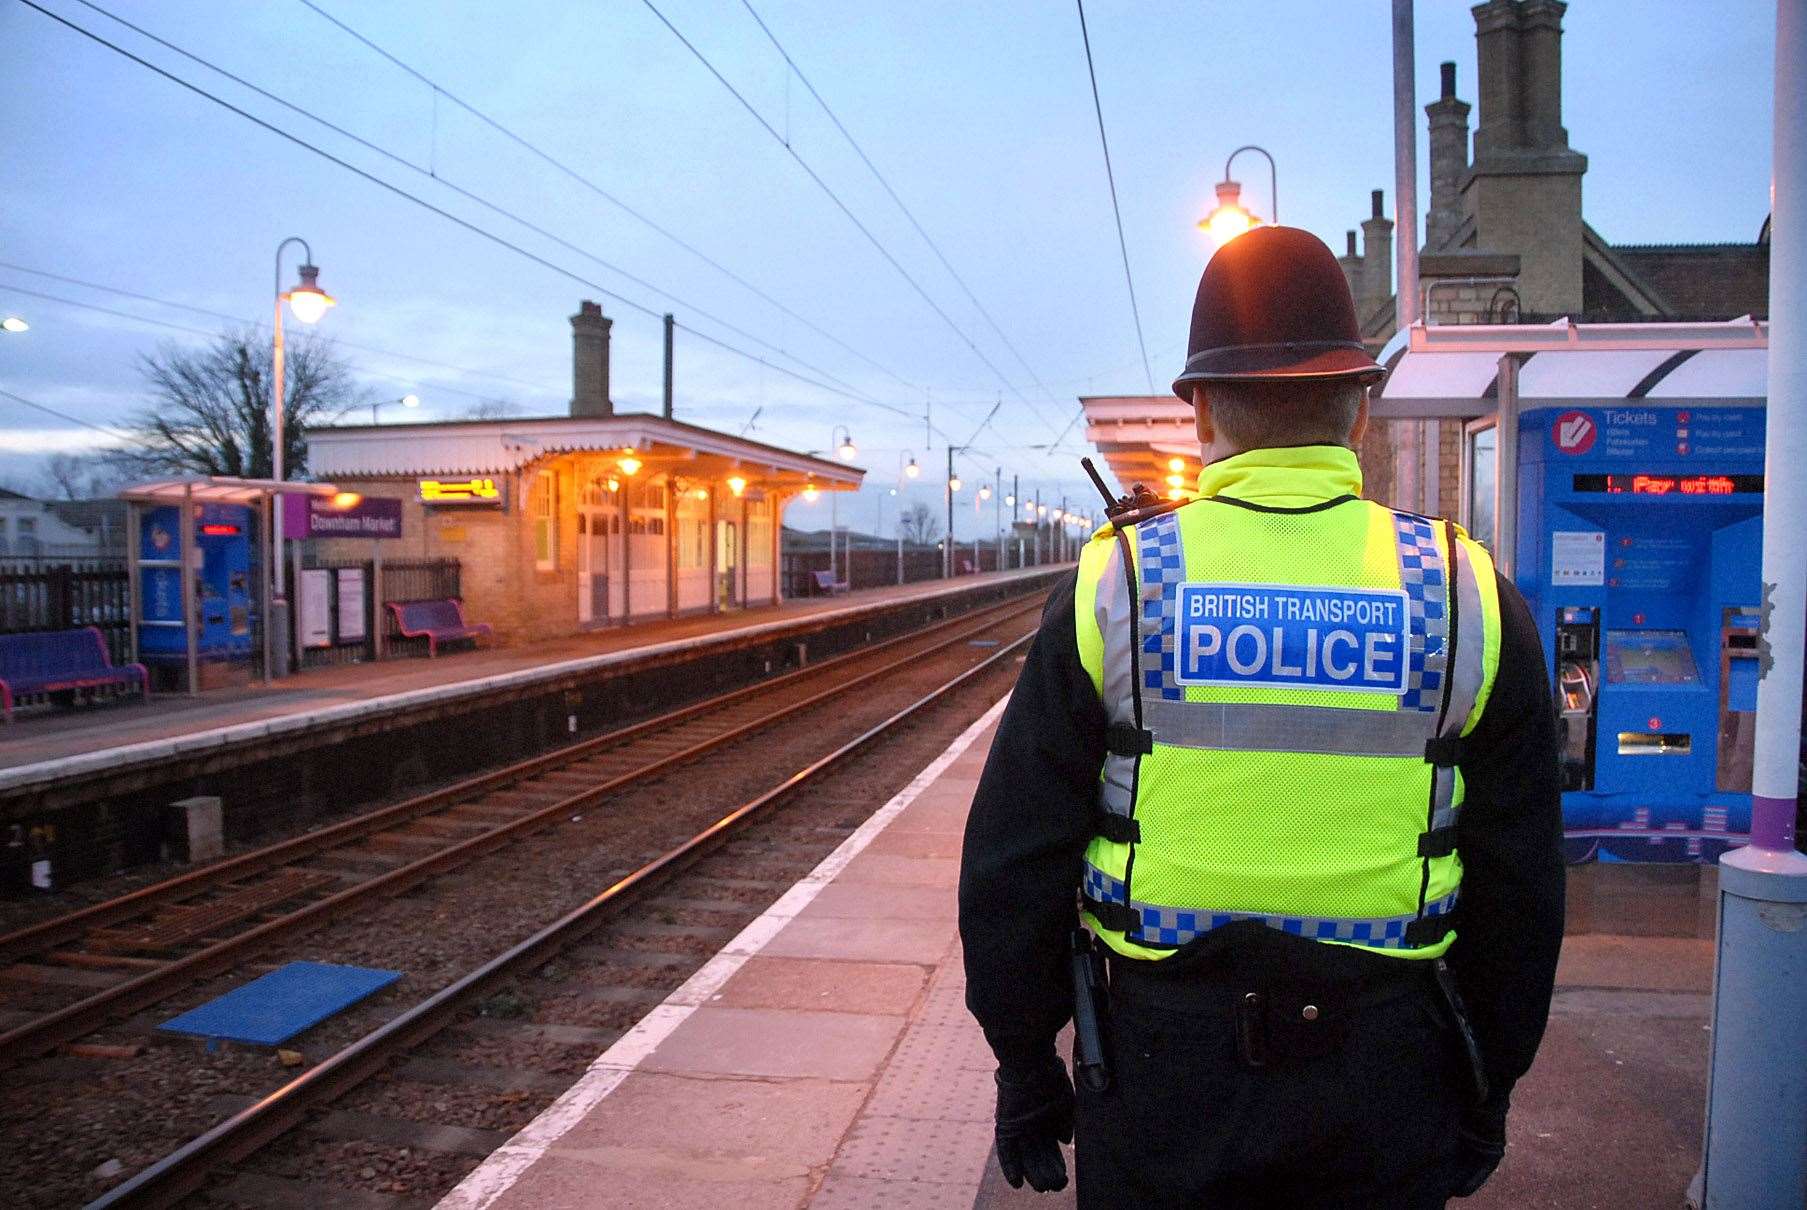 Only British Transport Police has found it necessary to issue fines in any significant number